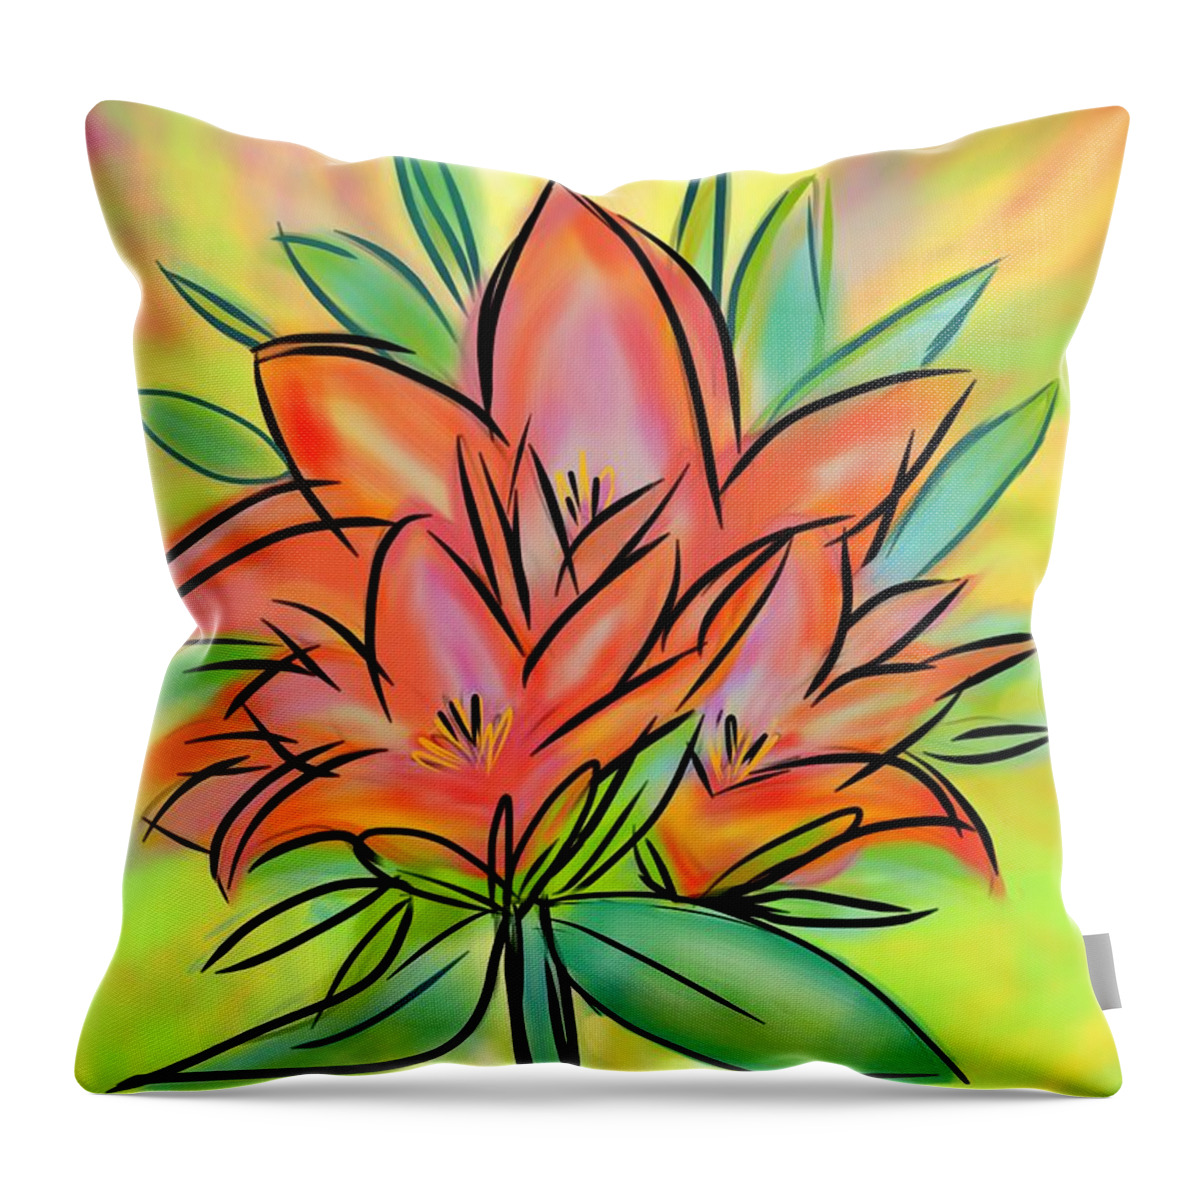 Lily Throw Pillow featuring the digital art Sunrise Lily by Christine Fournier